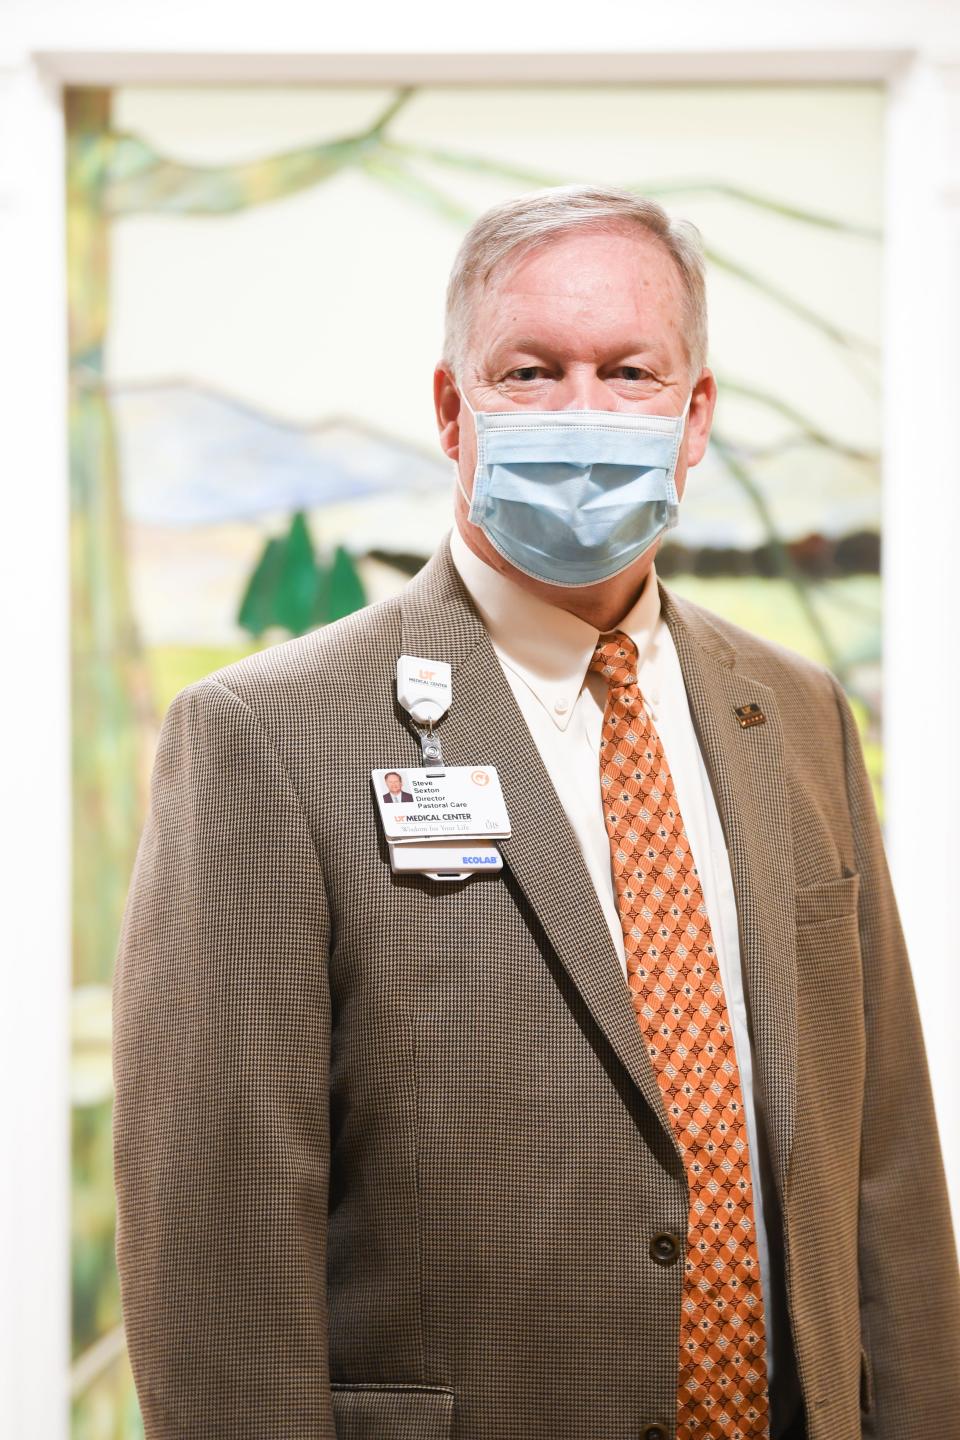 Steve Sexton, director of pastoral care at the University of Tennessee Medical Center, has help medical staffers as well as patients in the pandemic.